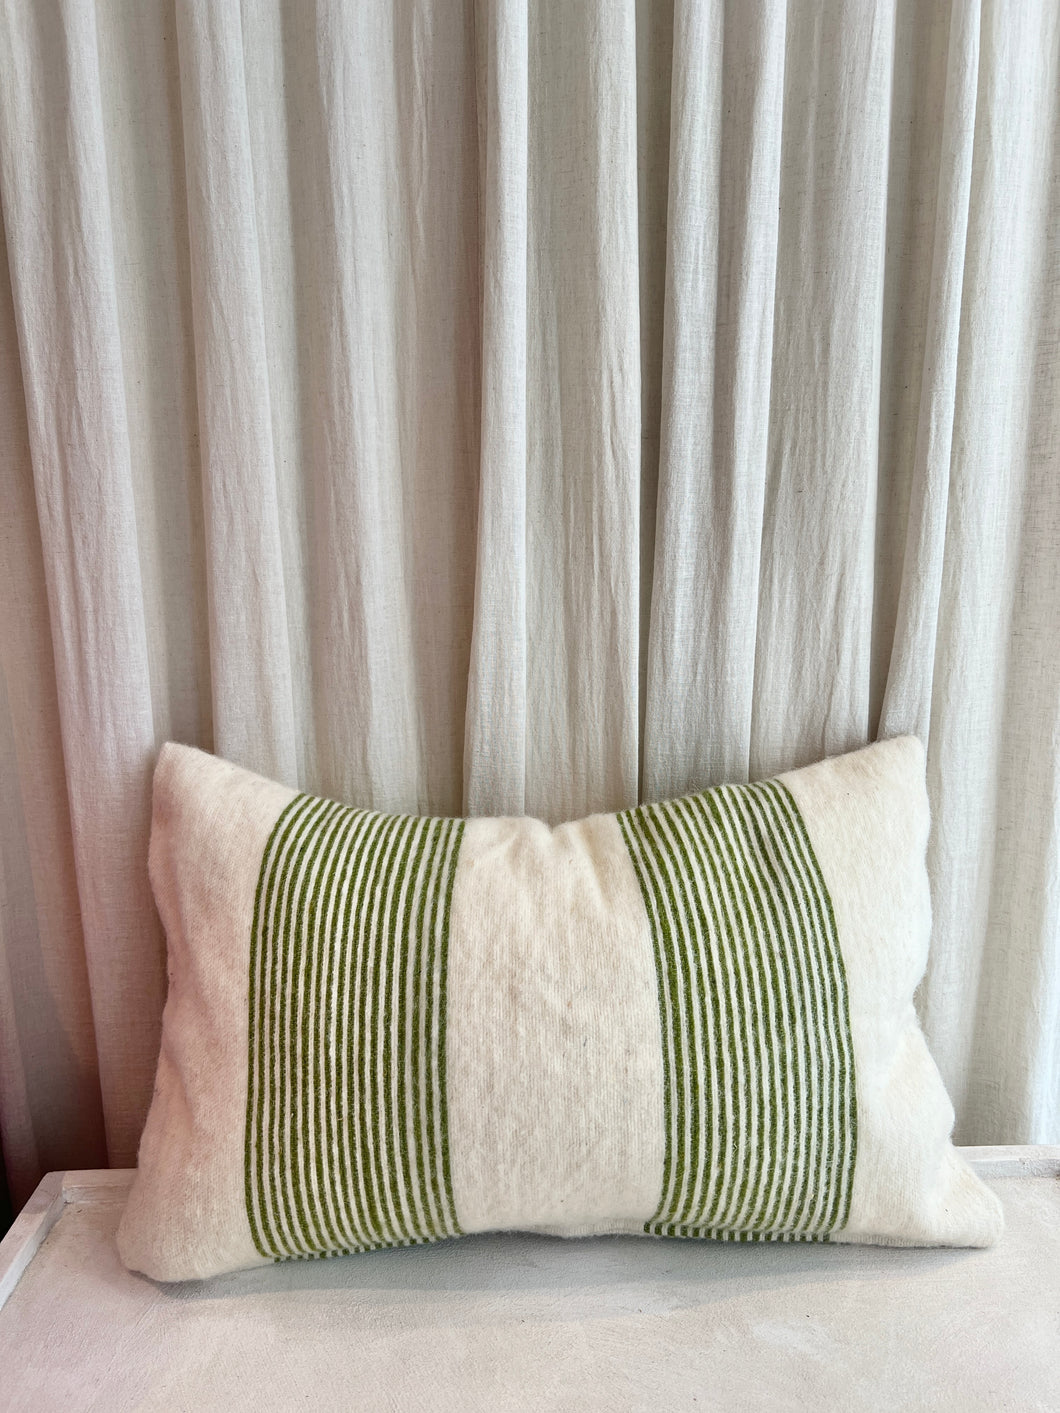 Household Hardware - Wool Pillow - Olive Stripes